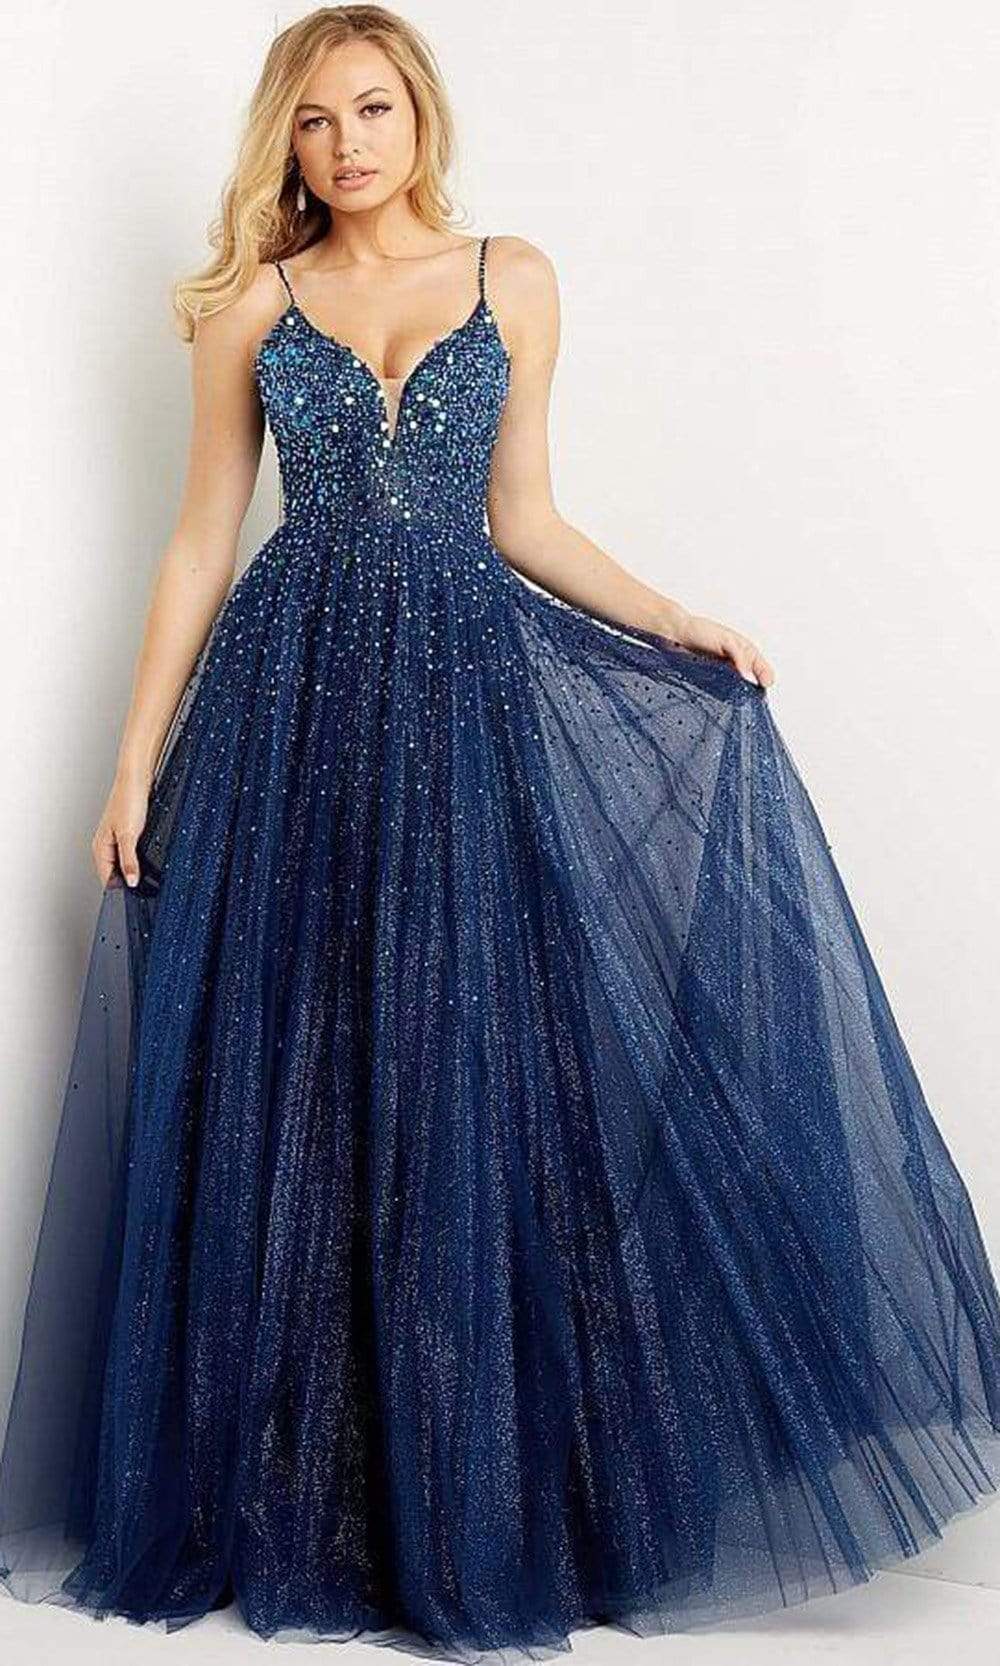 Image of Jovani - 08408 Midnight Glittery Prom Gown